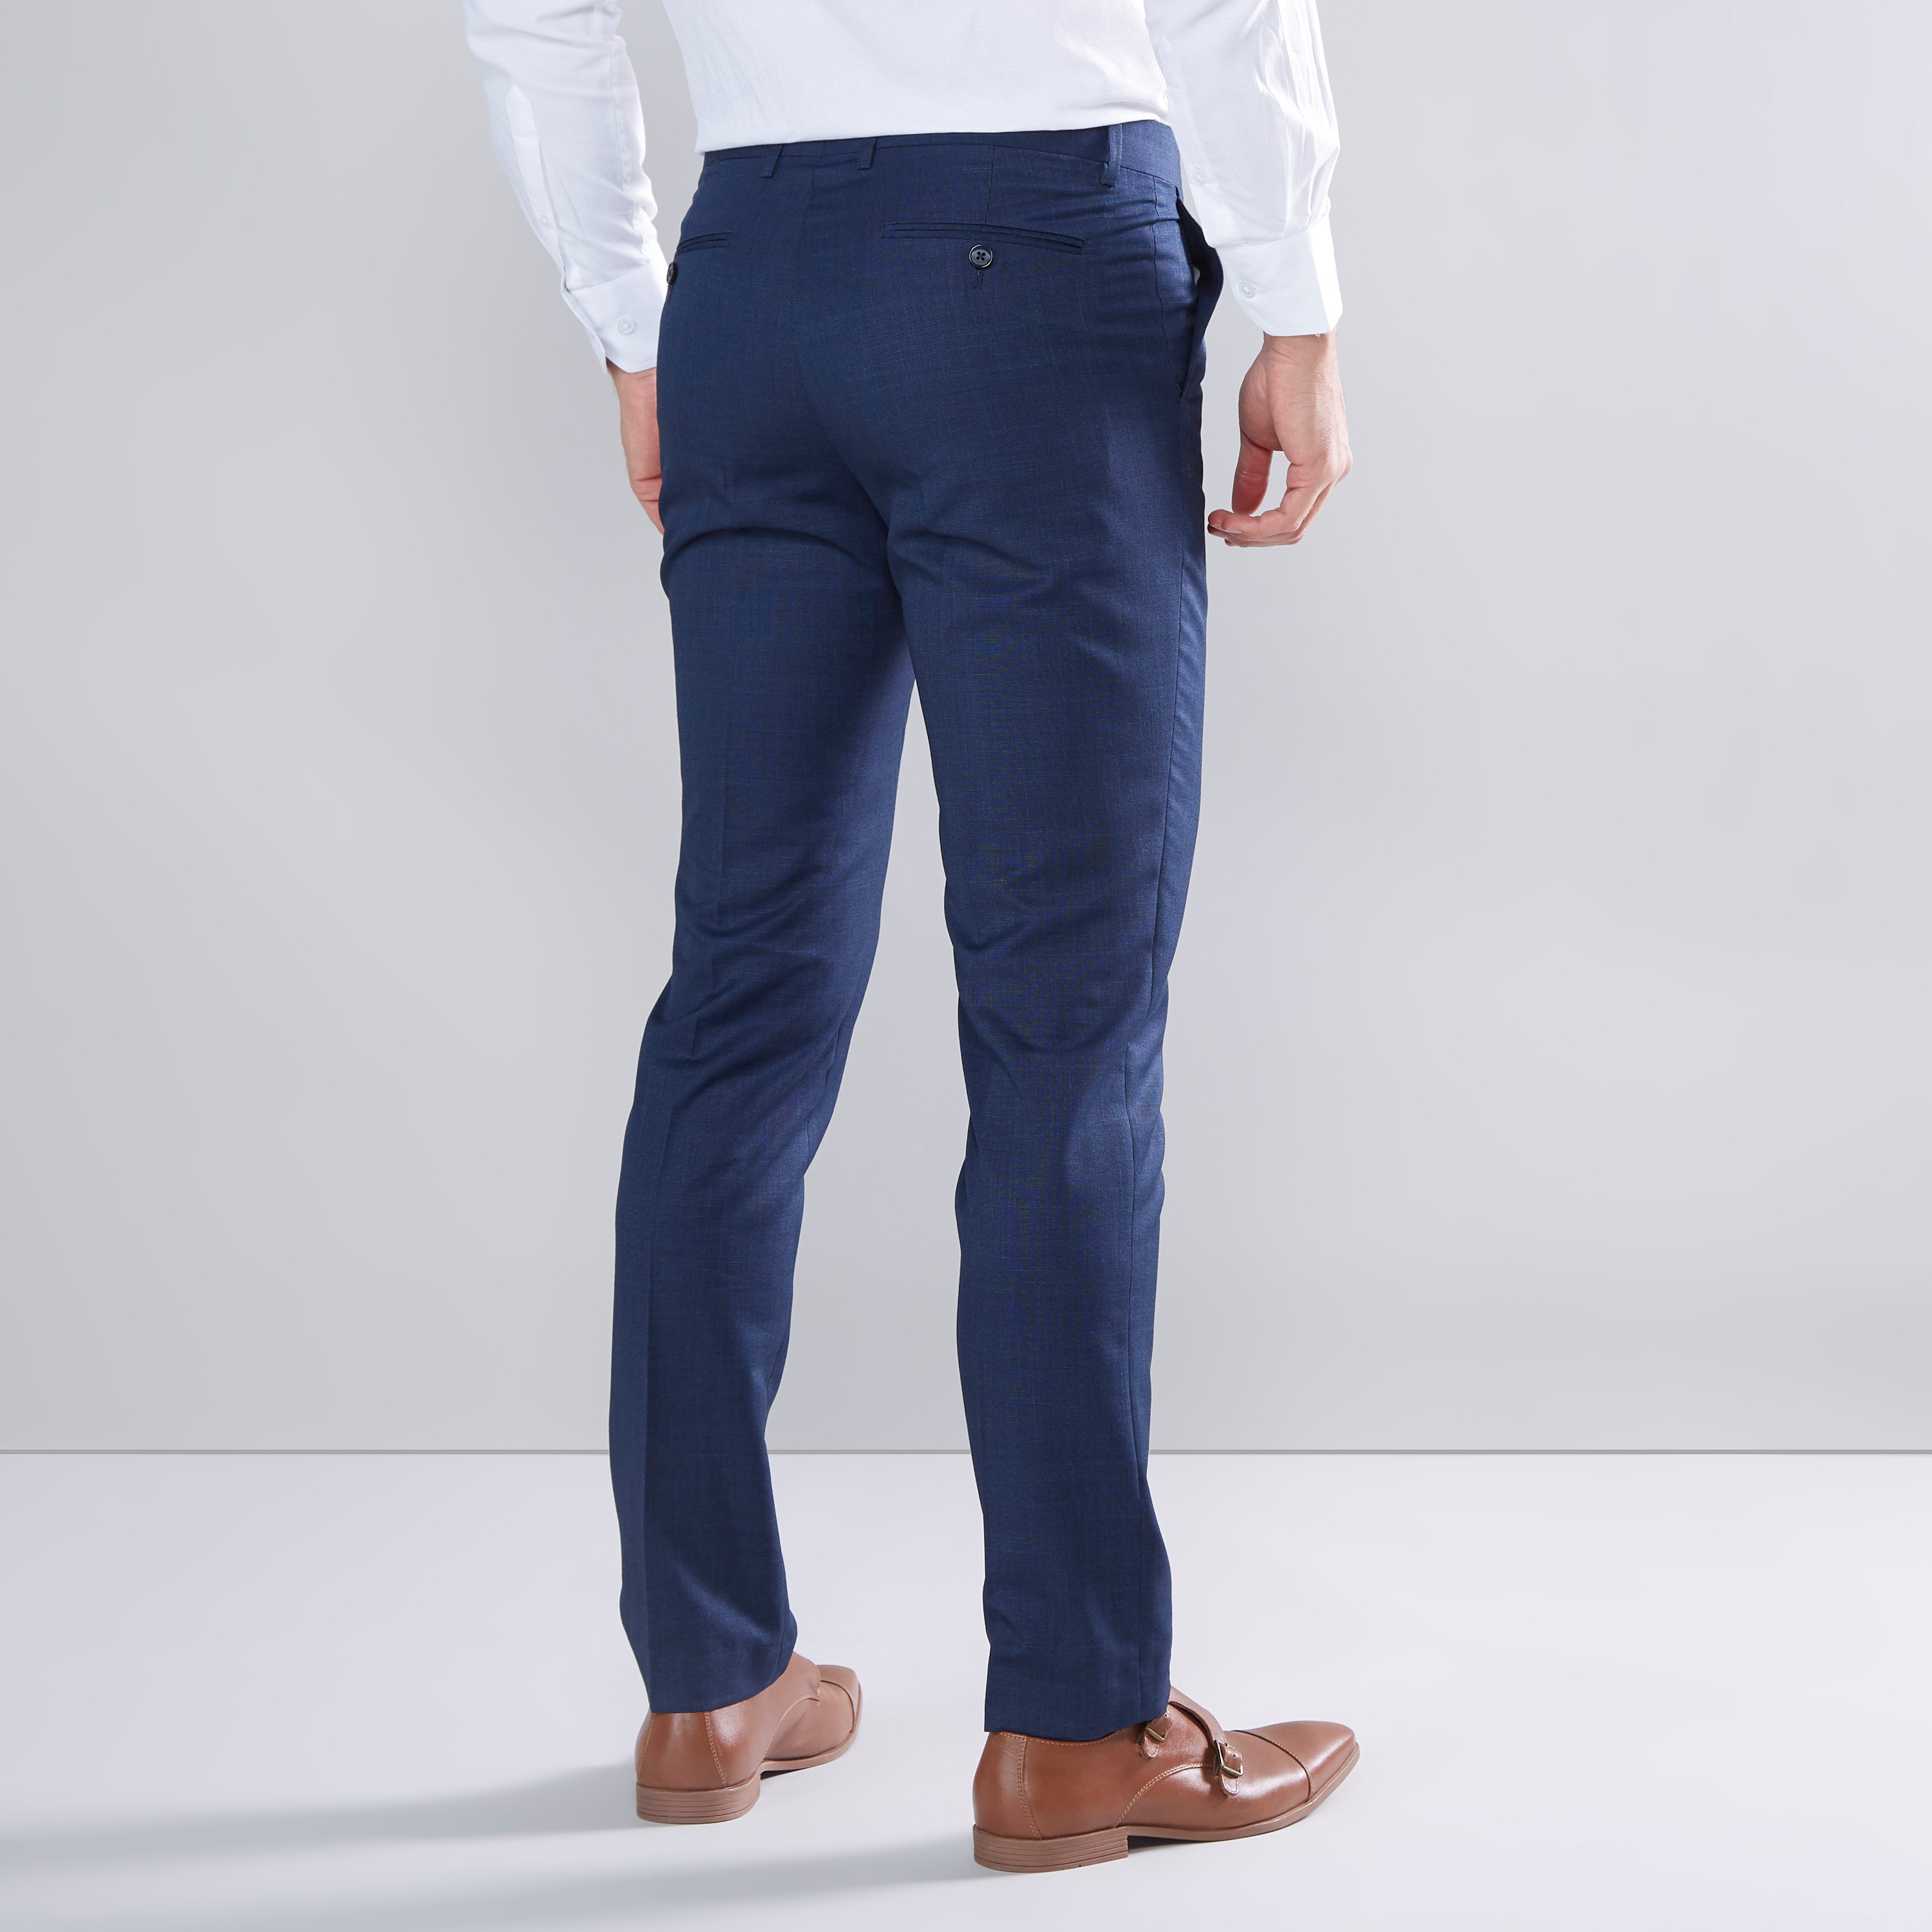 Shop Slim Fit Textured Pants with Belt Loops and Pocket Detail 